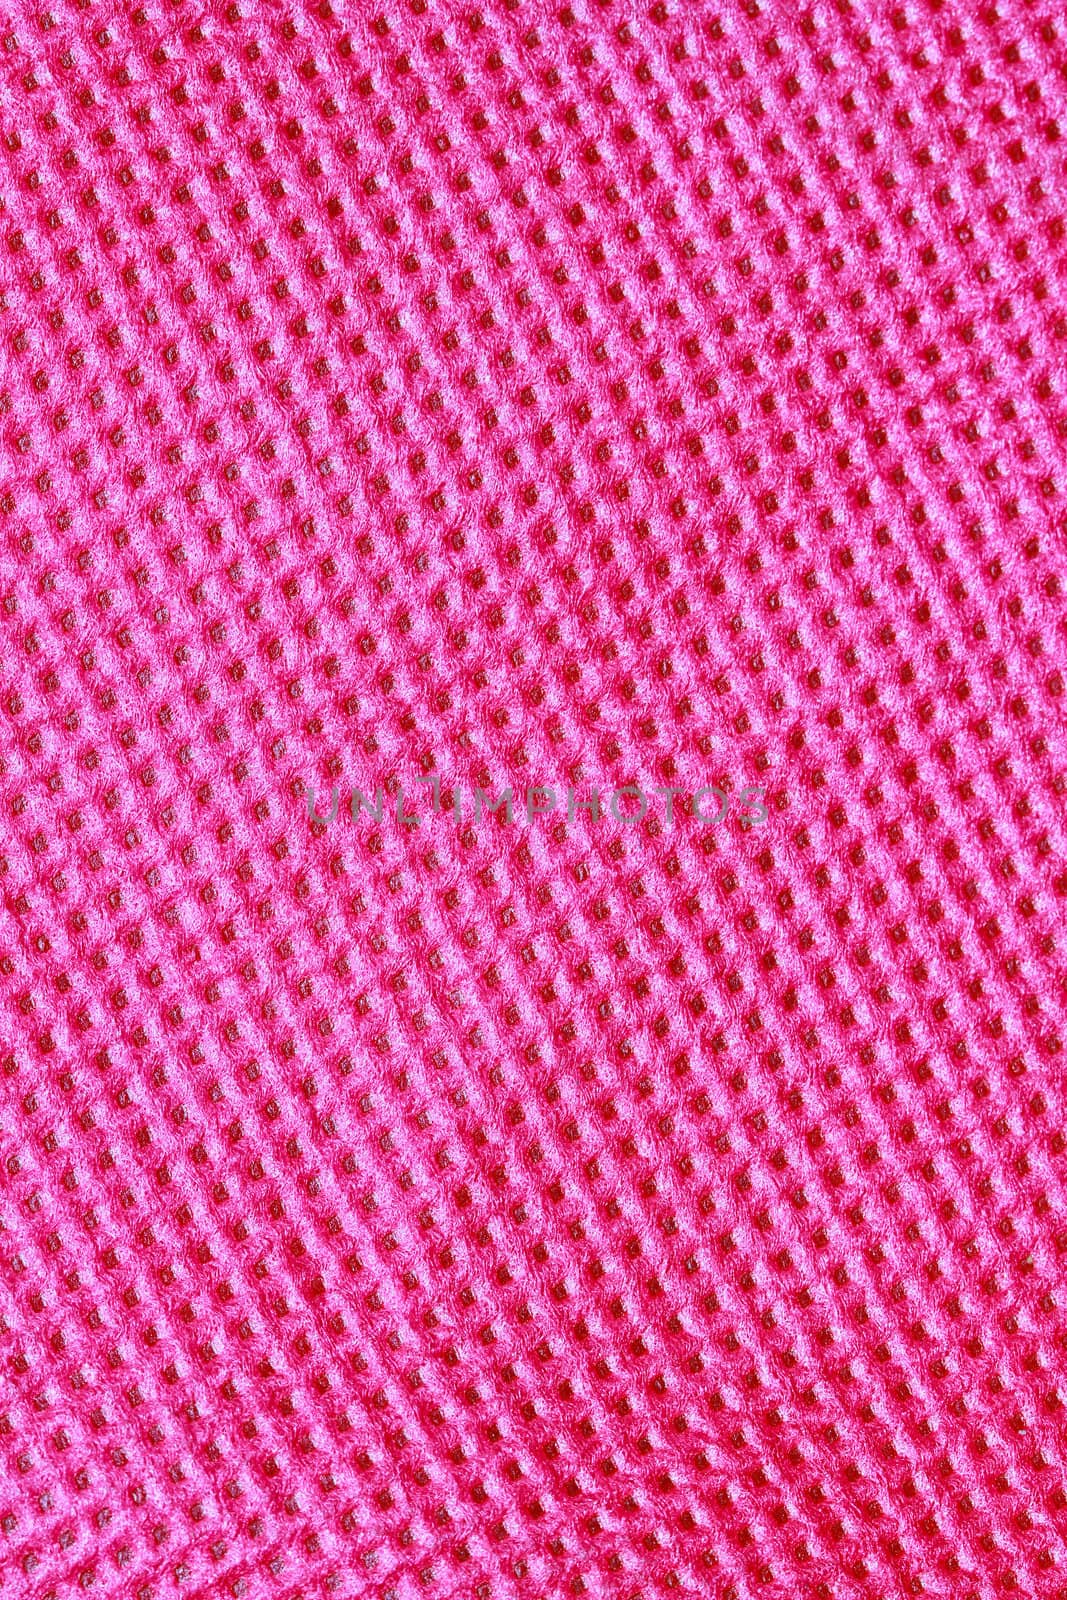 fibrous synthetic fabric texture background